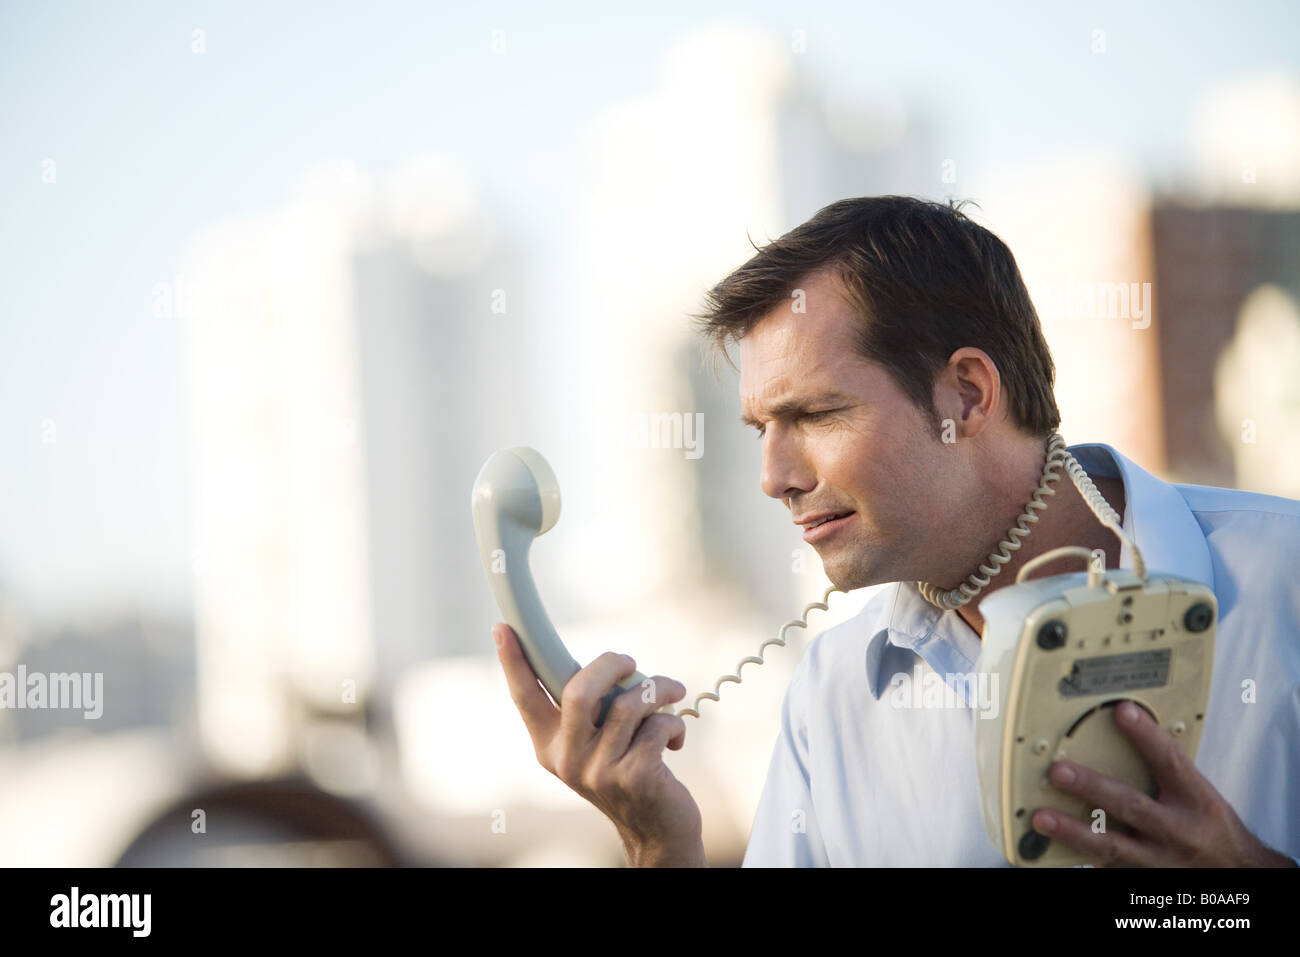 Man wrapping landline phone cord around neck, looking at receiver Stock Photo